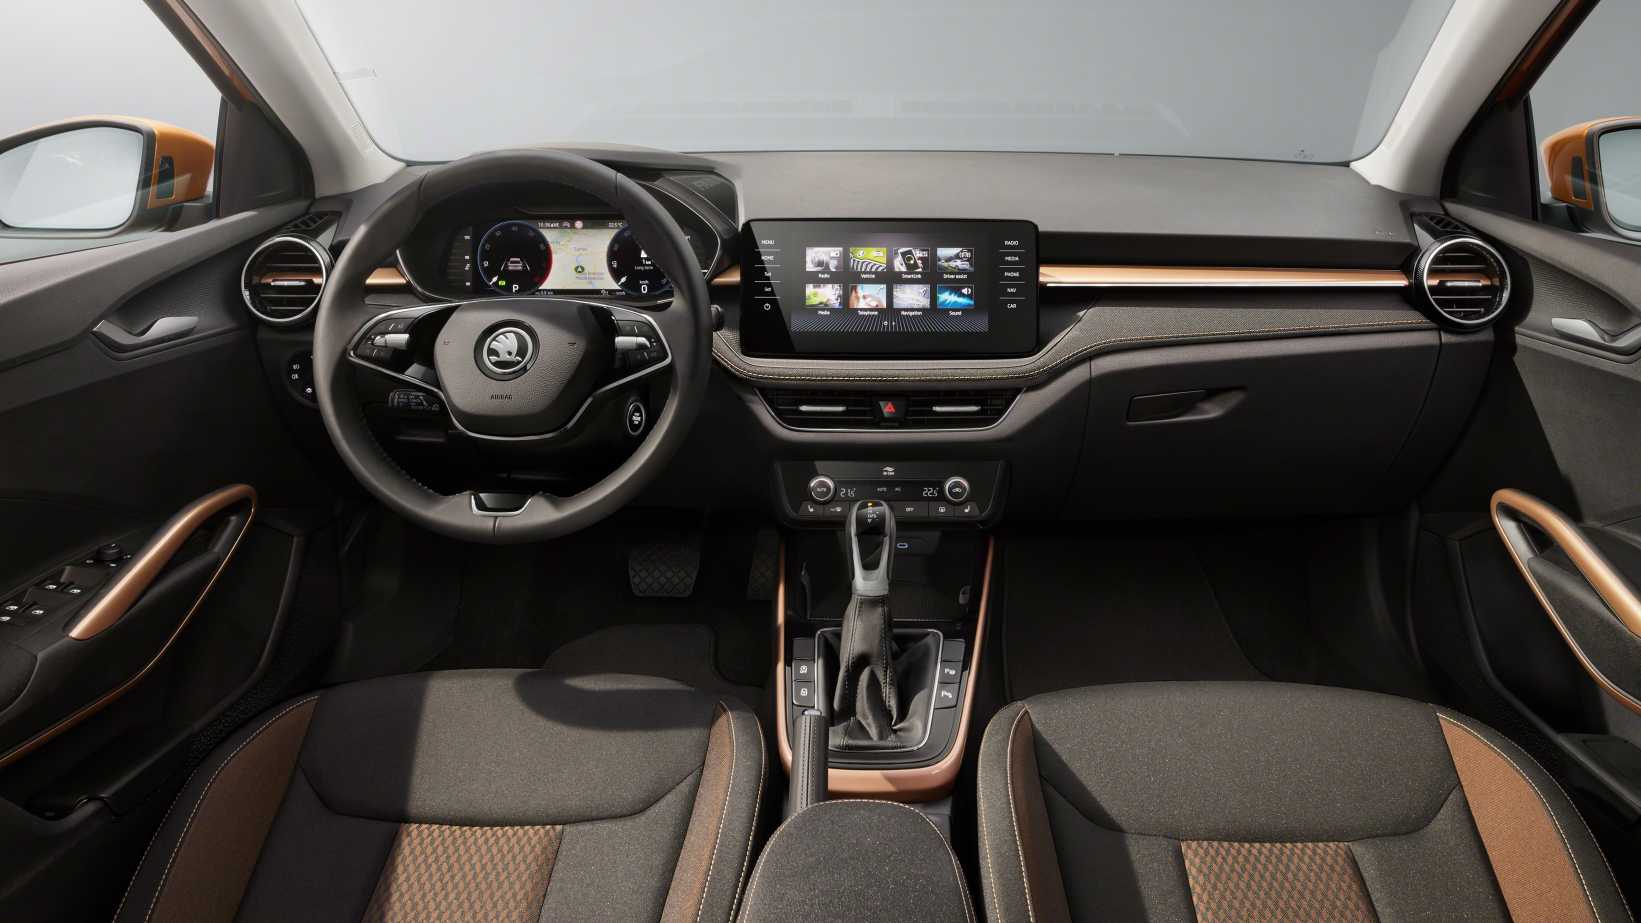 The new Skoda Fabia's interior appears to have plenty in common with the Kushaq's. Image: Skoda